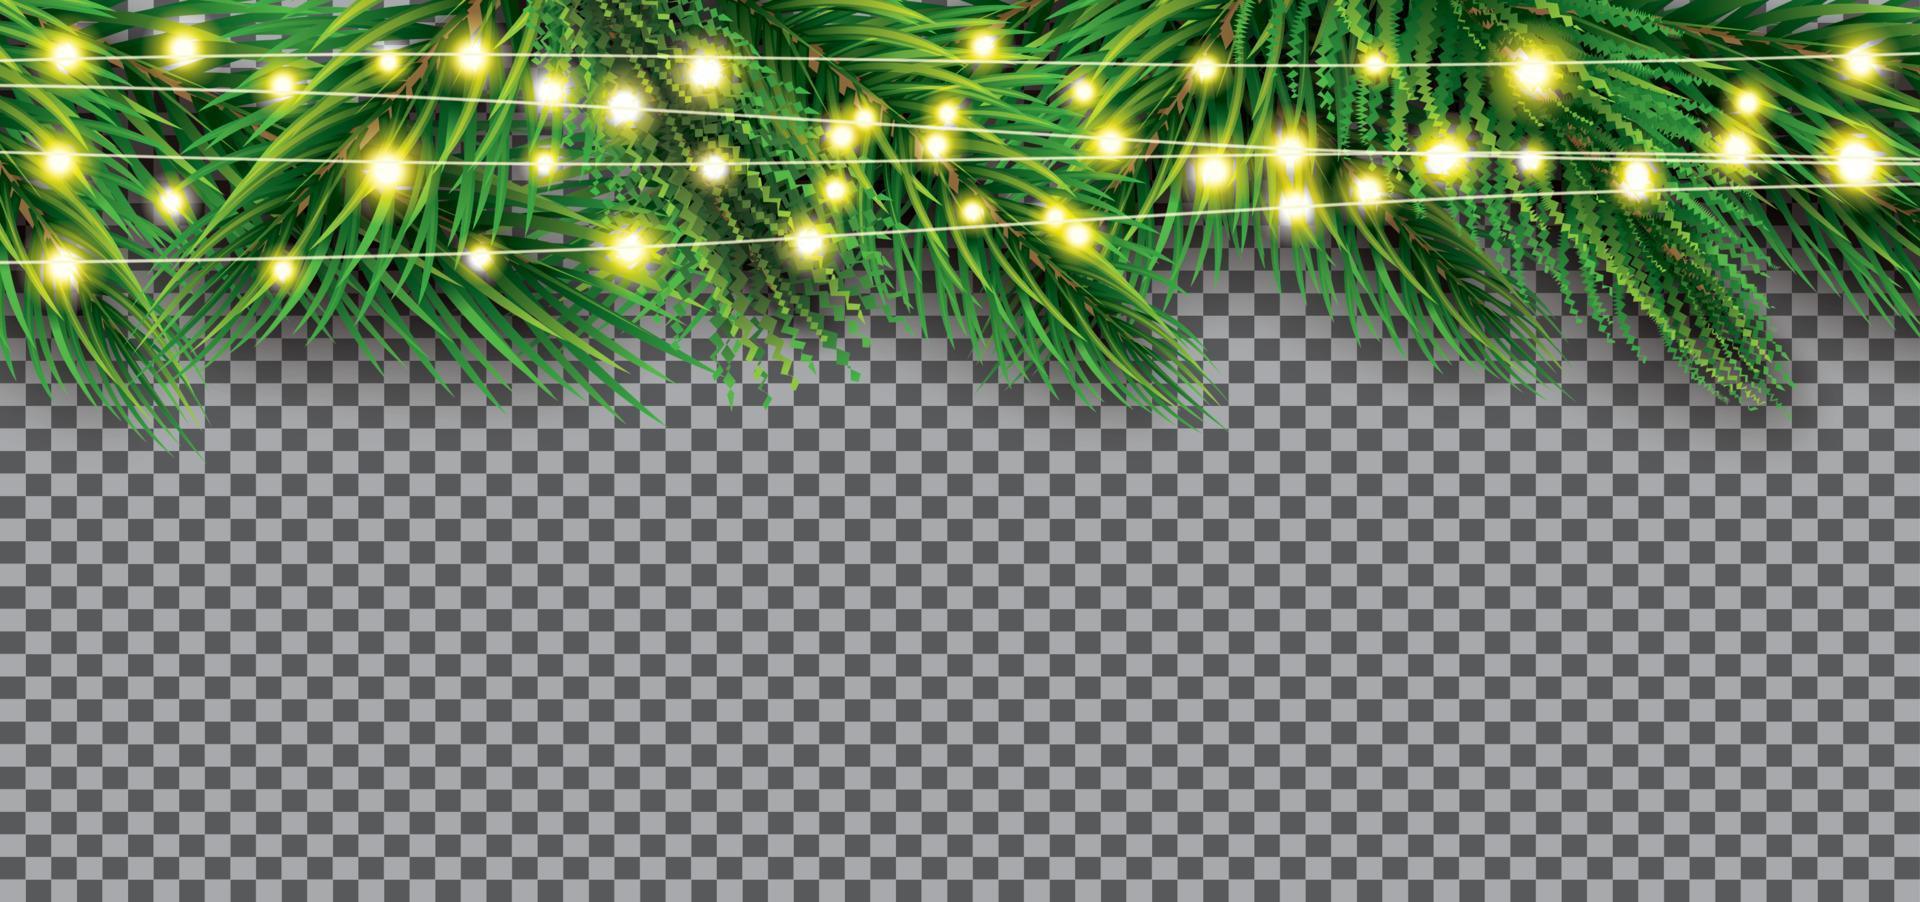 Christmas Border with Fir Branch with Neon Lights on Transparent Background. Pine Sprigs on Above. vector